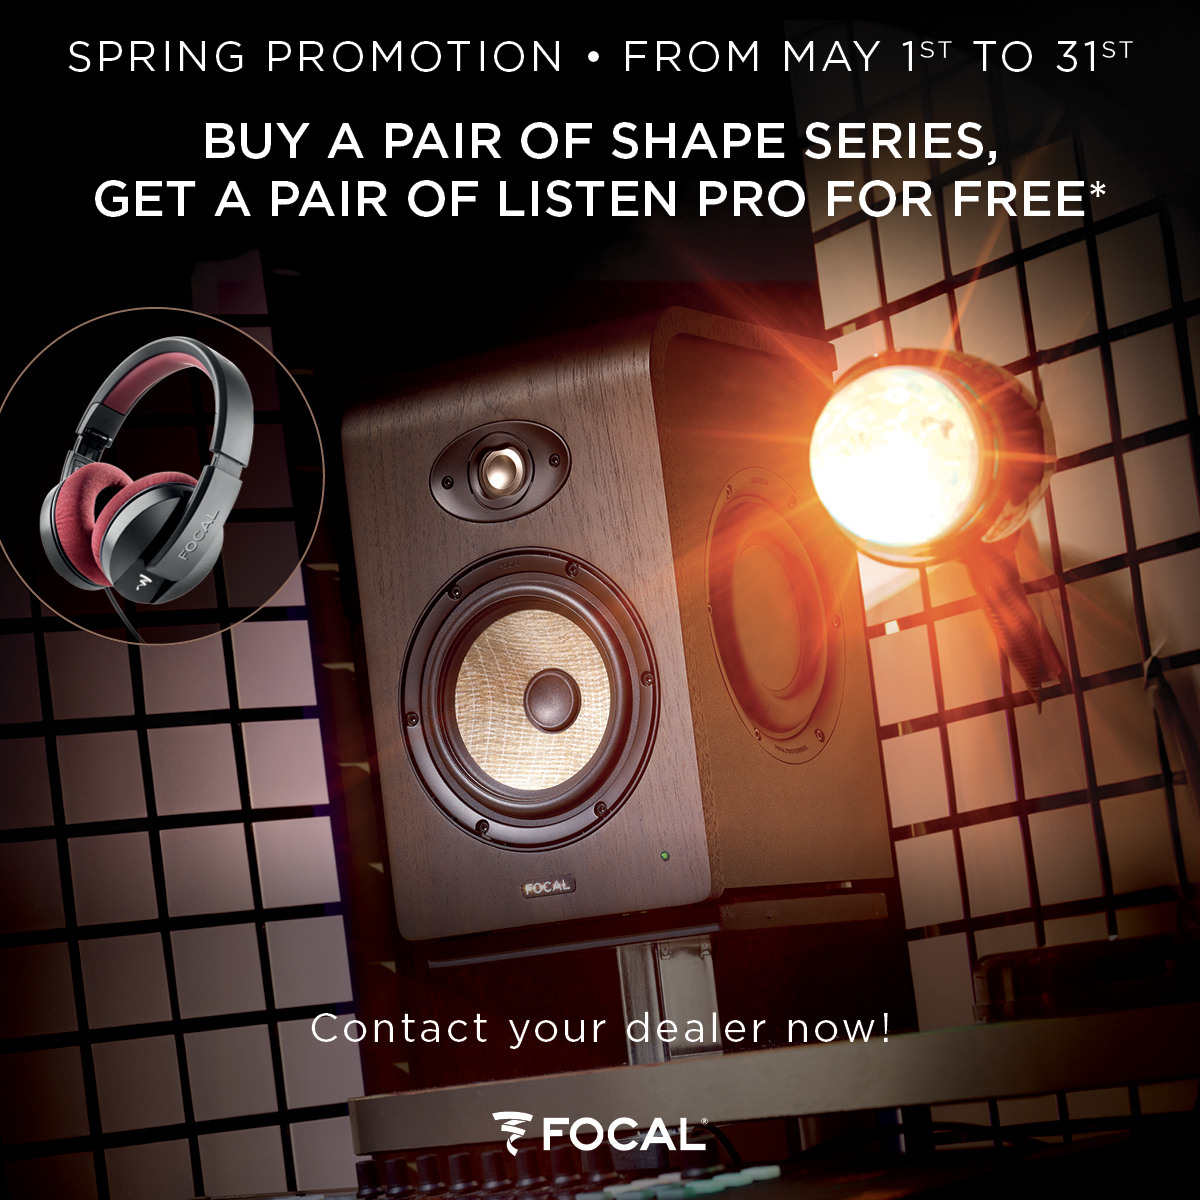 Save on Focal Professional Speakers the month of May!
purewaveaudio.com/specials
⁠
#recordingstudio #recording #recordingengineer #soundengineering #studio #homestudio #musicmaking#mixingengineer #mixengineer #audioengineer #mixingtips #recordingtips #Focal professional,